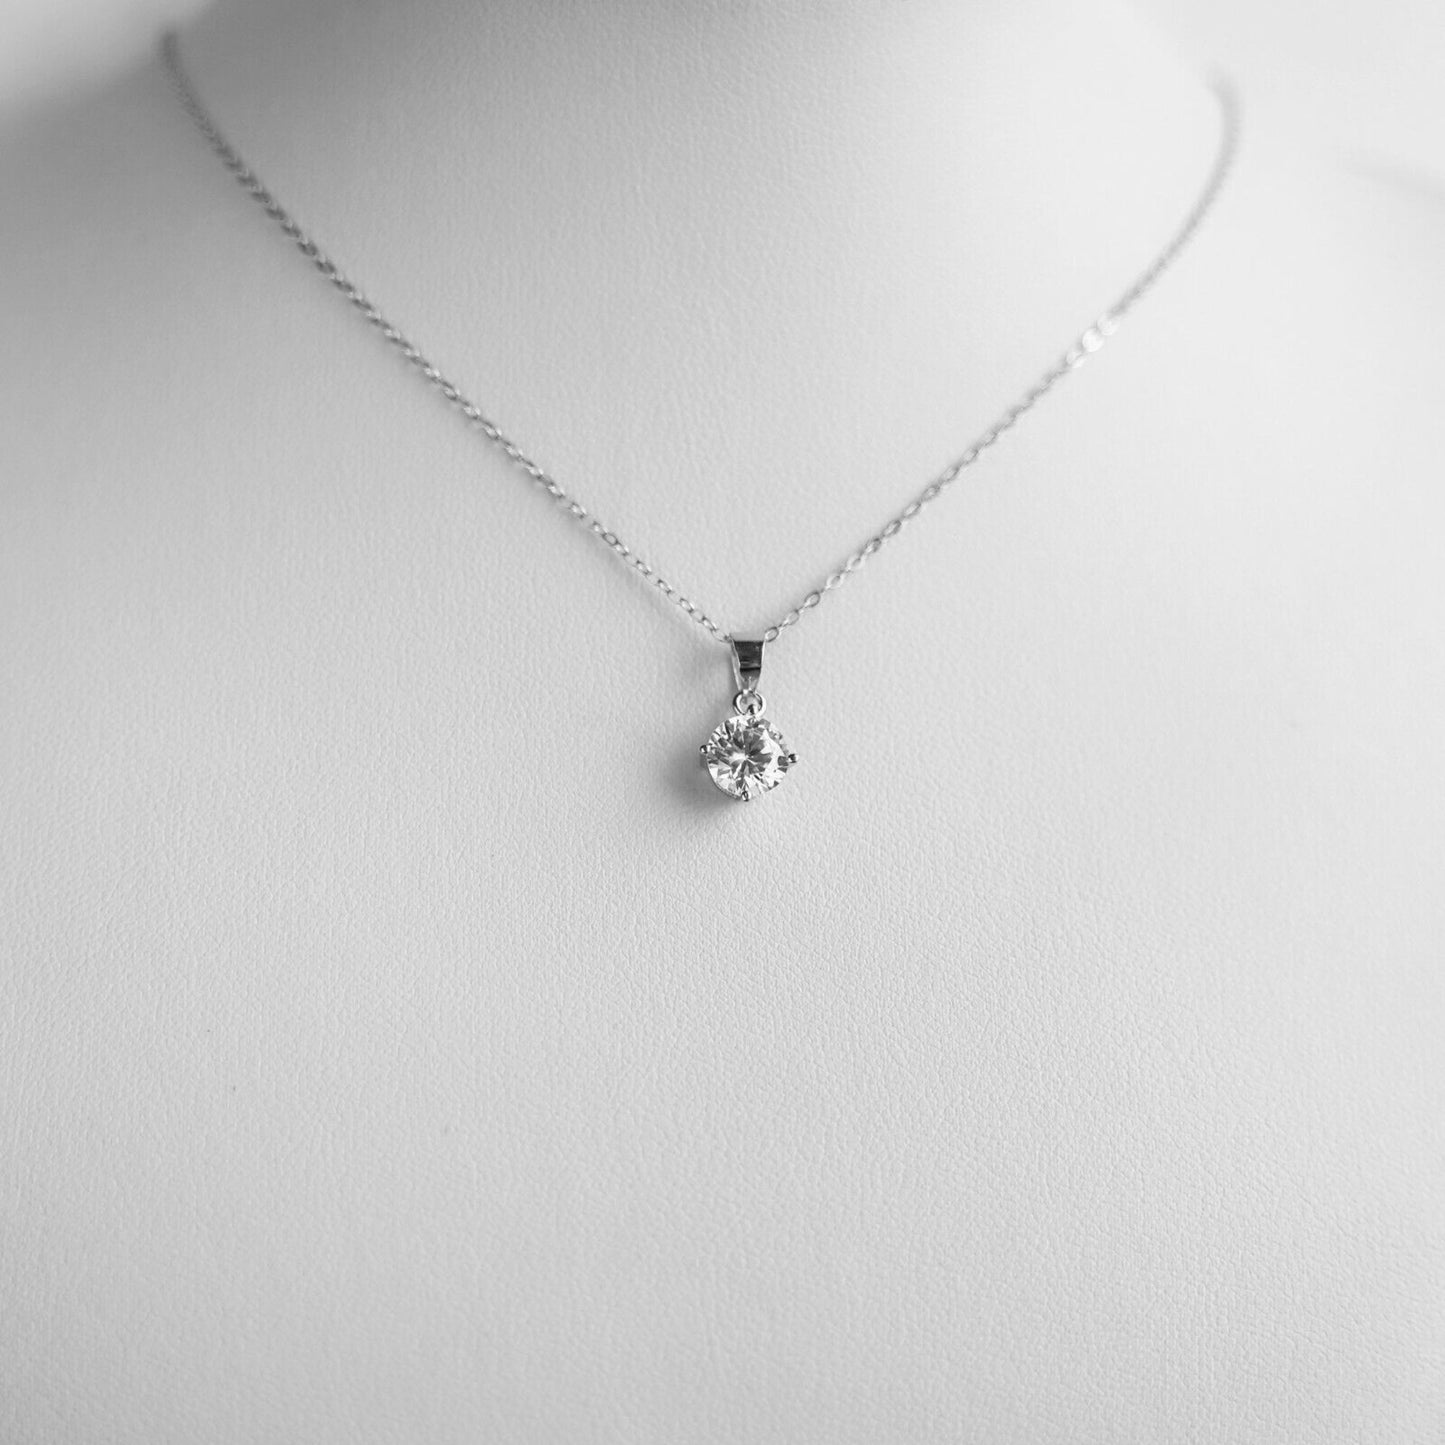 Sterling Silver Solitaire CZ Pendant Necklace with Belcher Chain - sugarkittenlondon